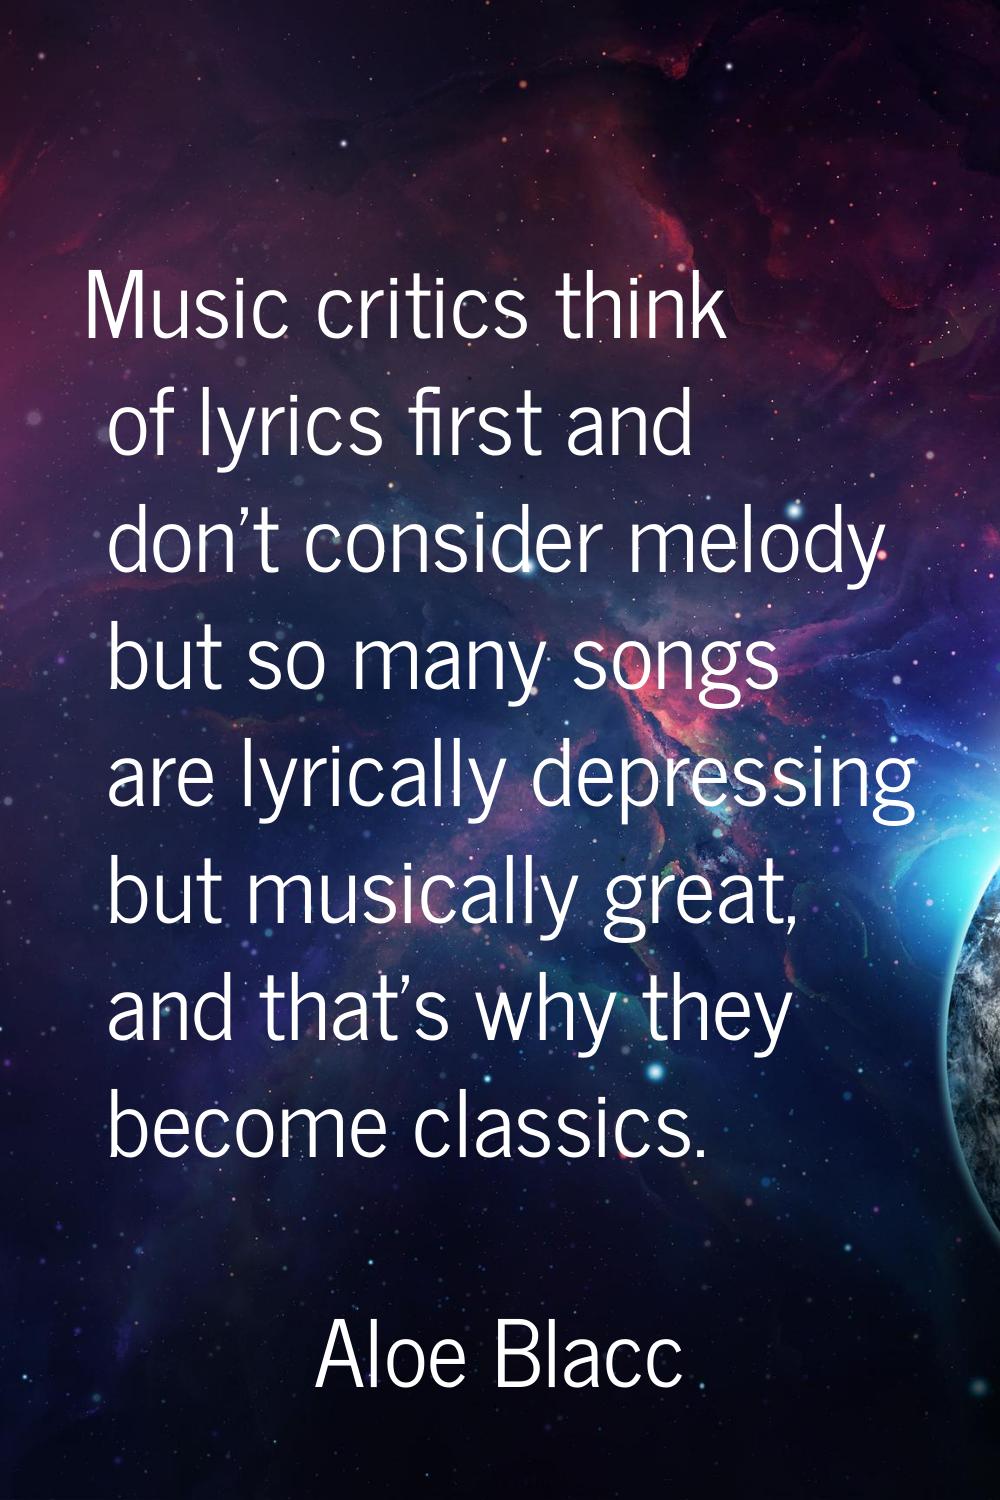 Music critics think of lyrics first and don't consider melody but so many songs are lyrically depre